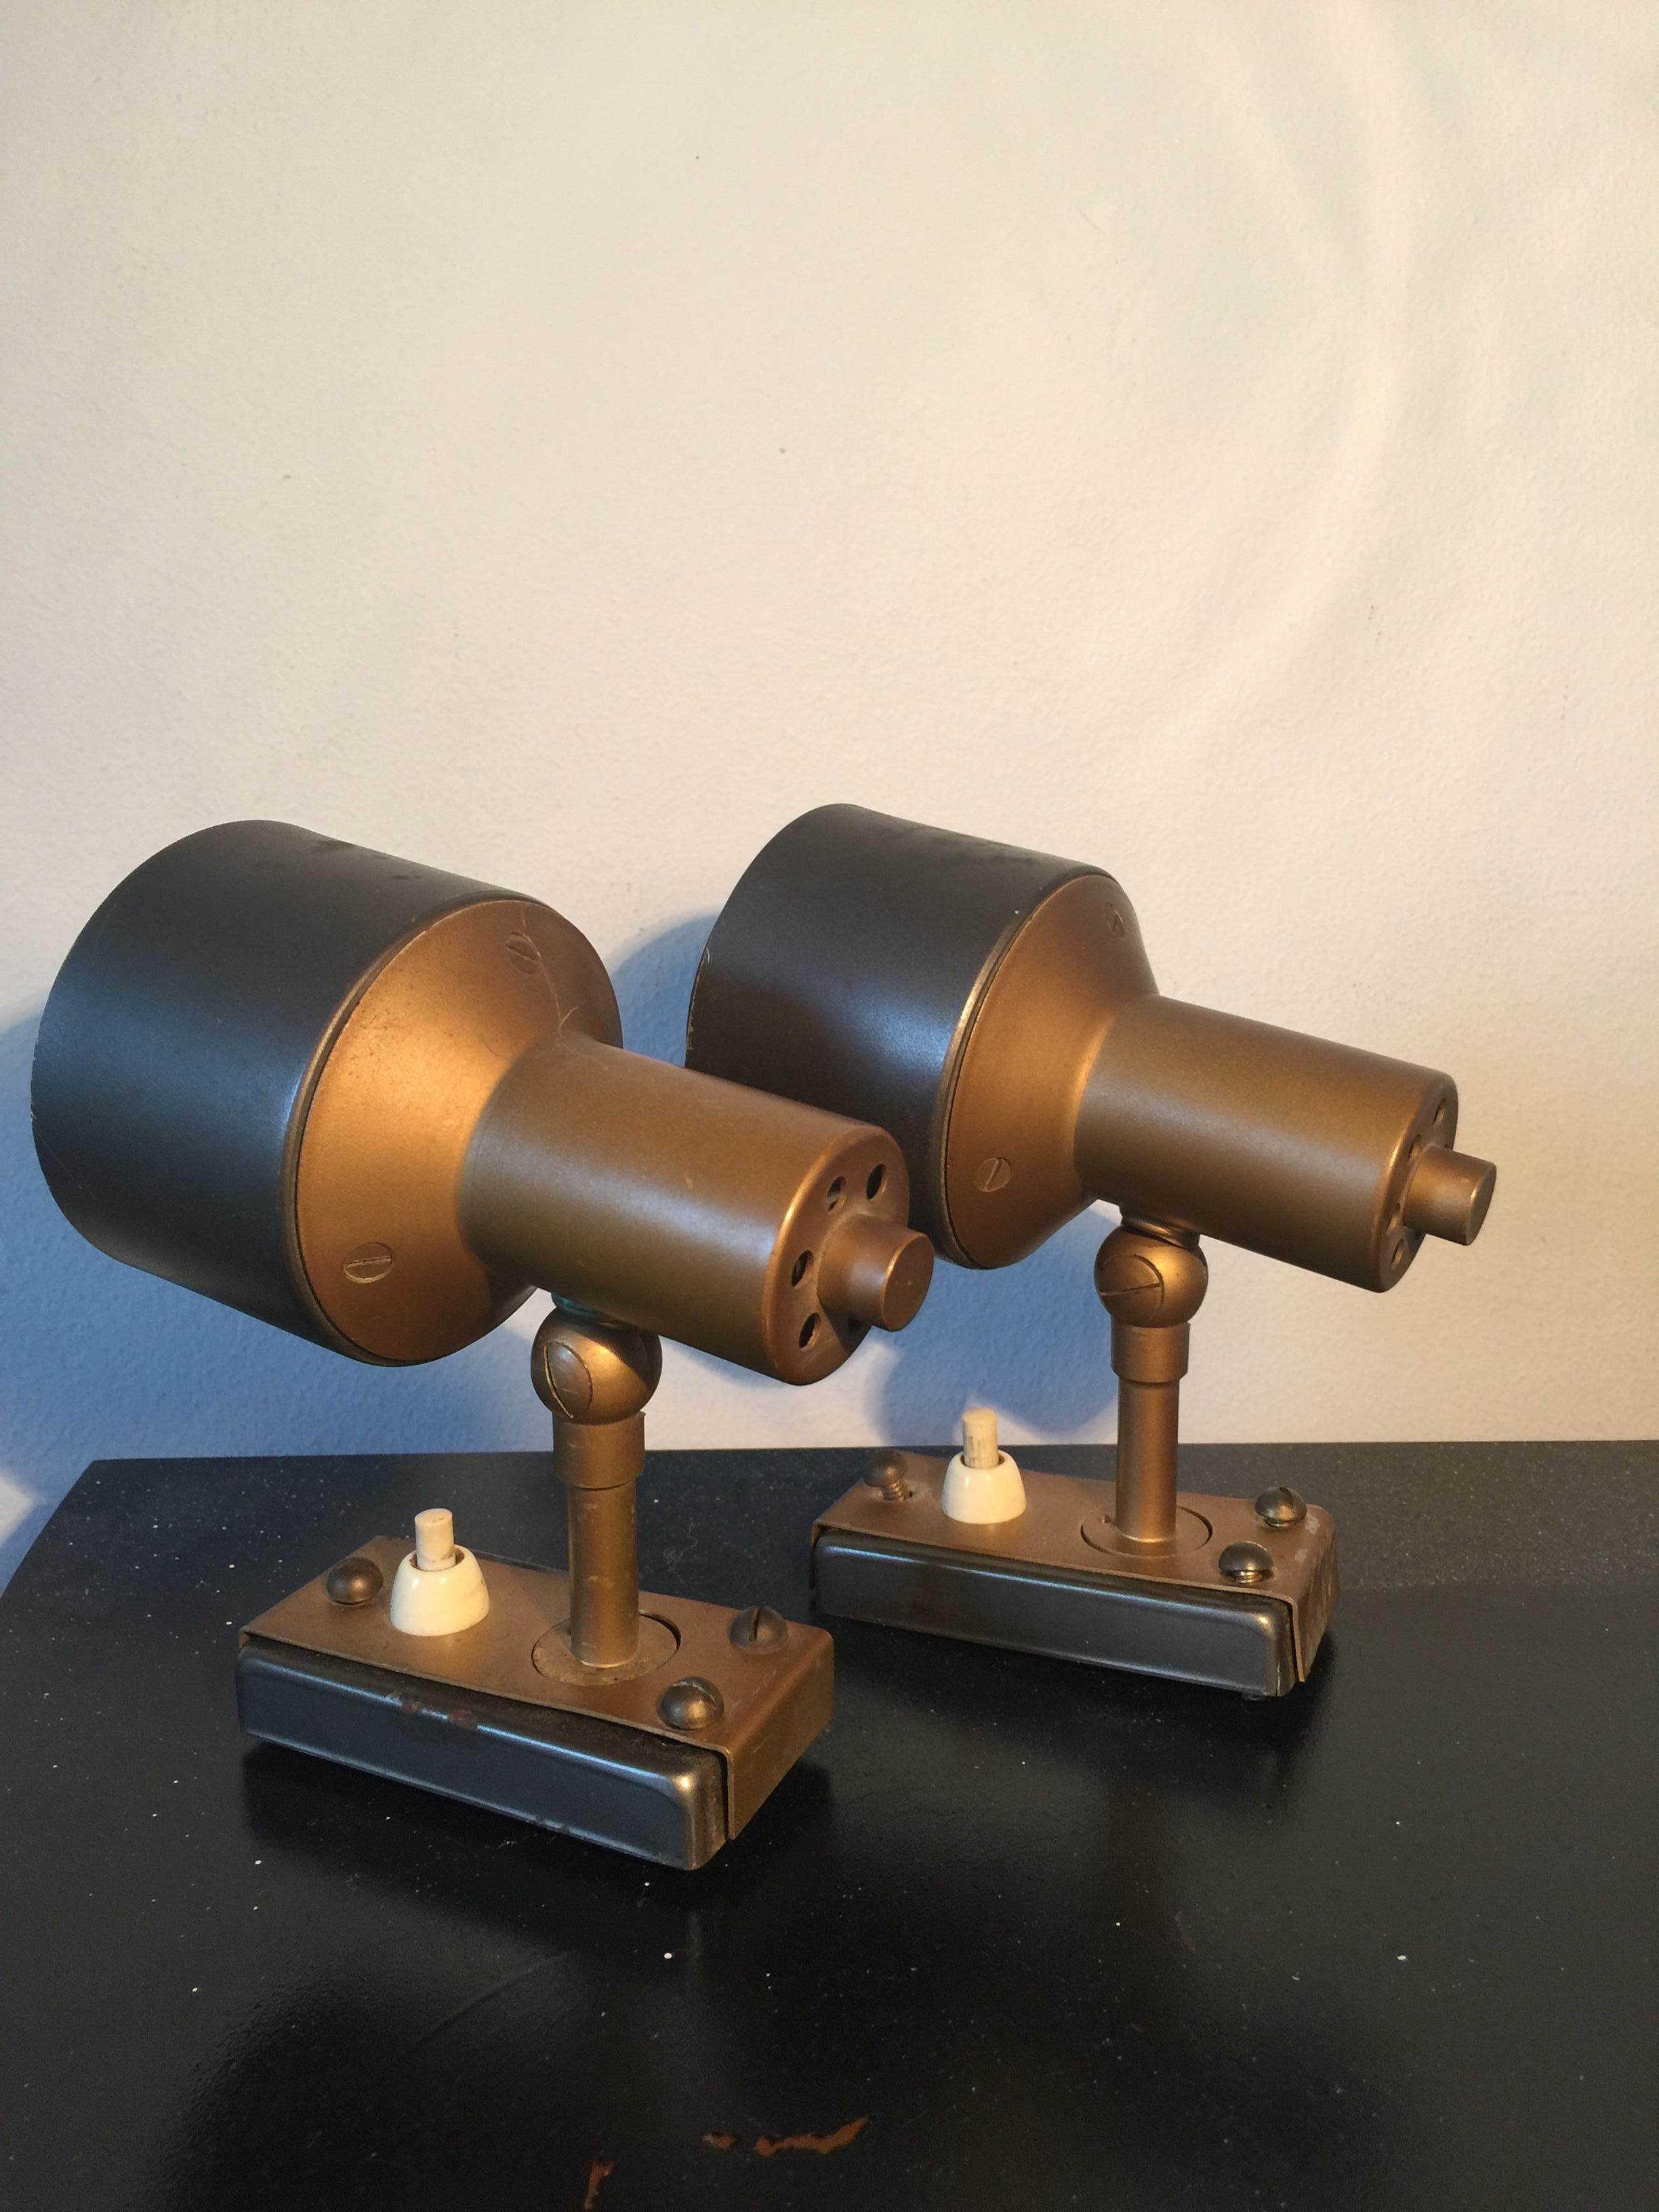 This pair of spotlights was produced in the 1950s in Italy by Stilnovo. They are made from aluminum and brass and are in original vintage condition with some visible scratches.